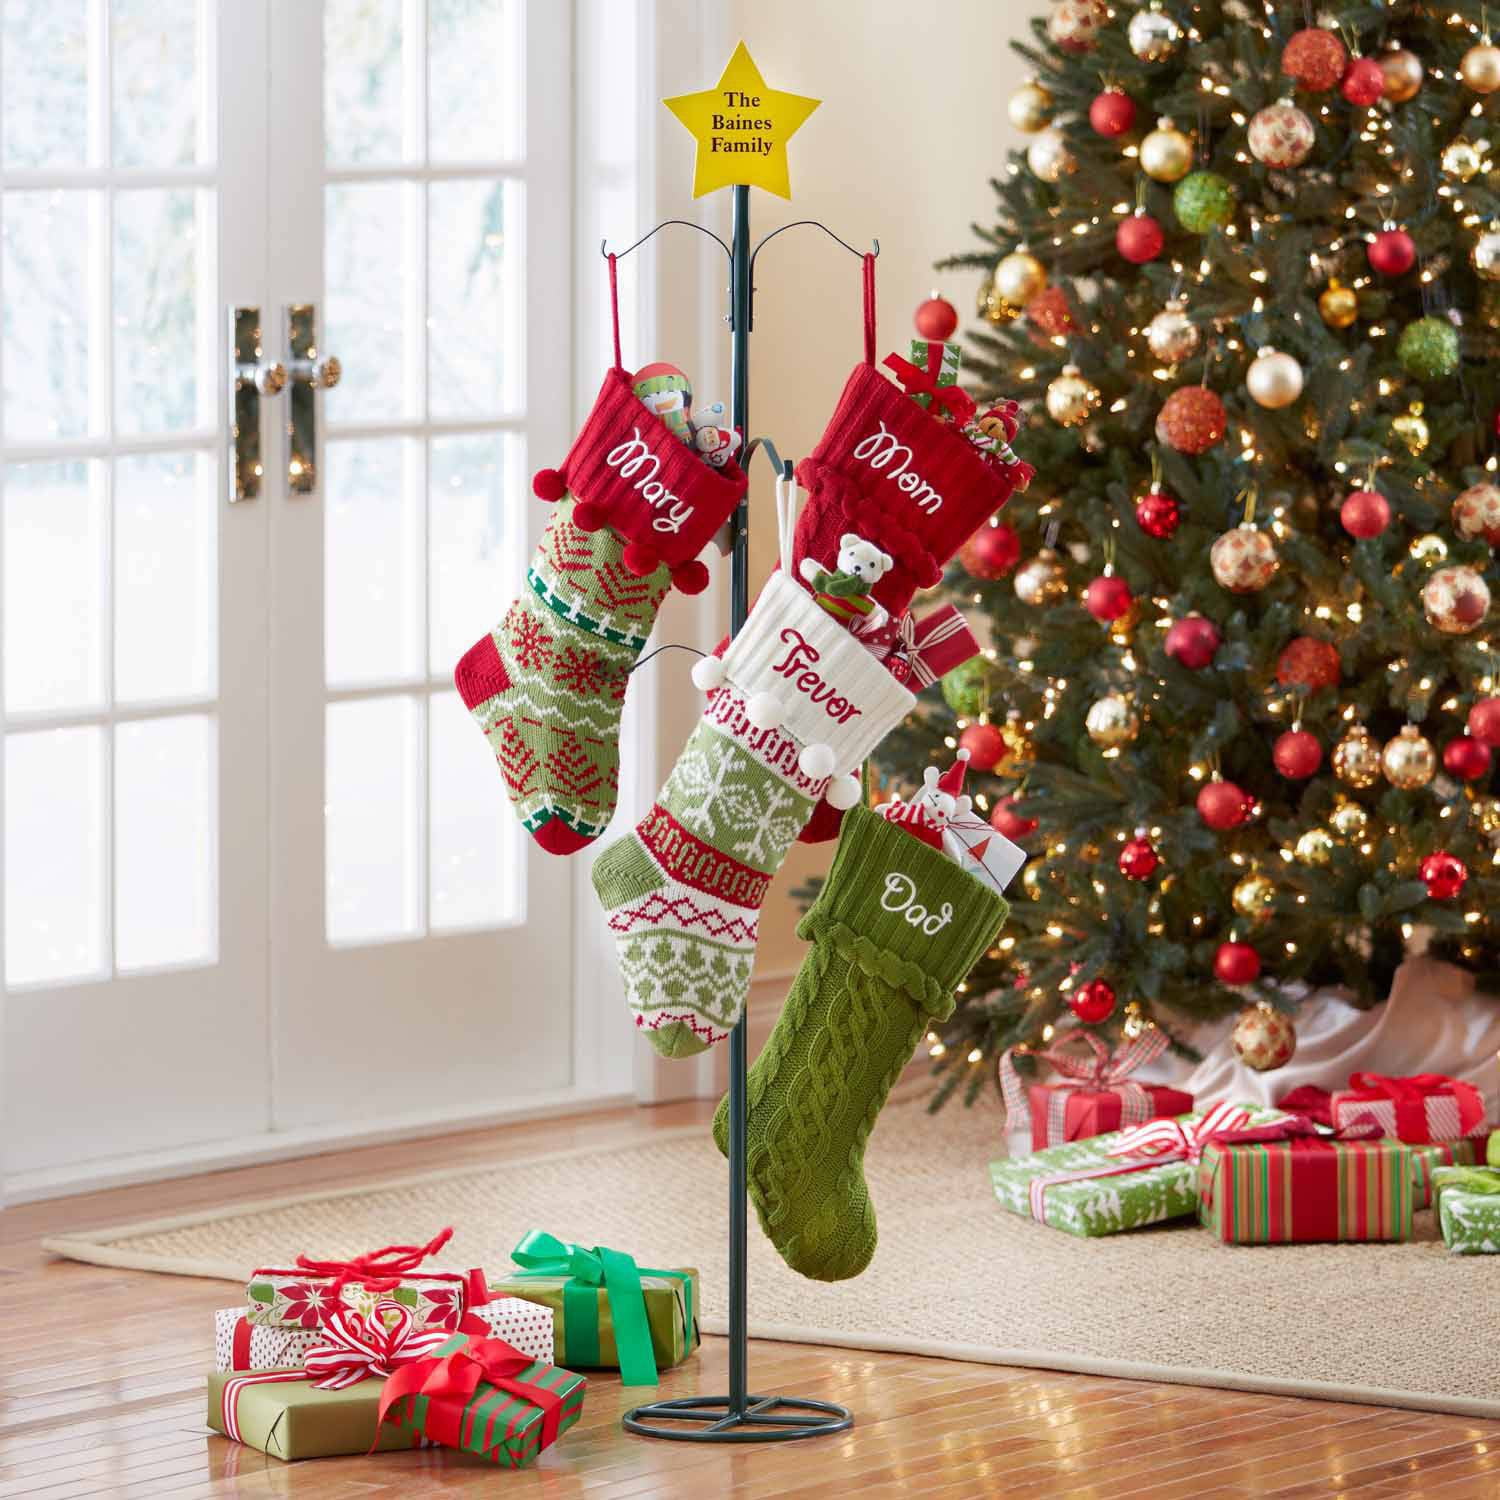 Free Shipping on orders over $35. Buy Personalized Metal Christmas Stocking Holder at Walmart.com